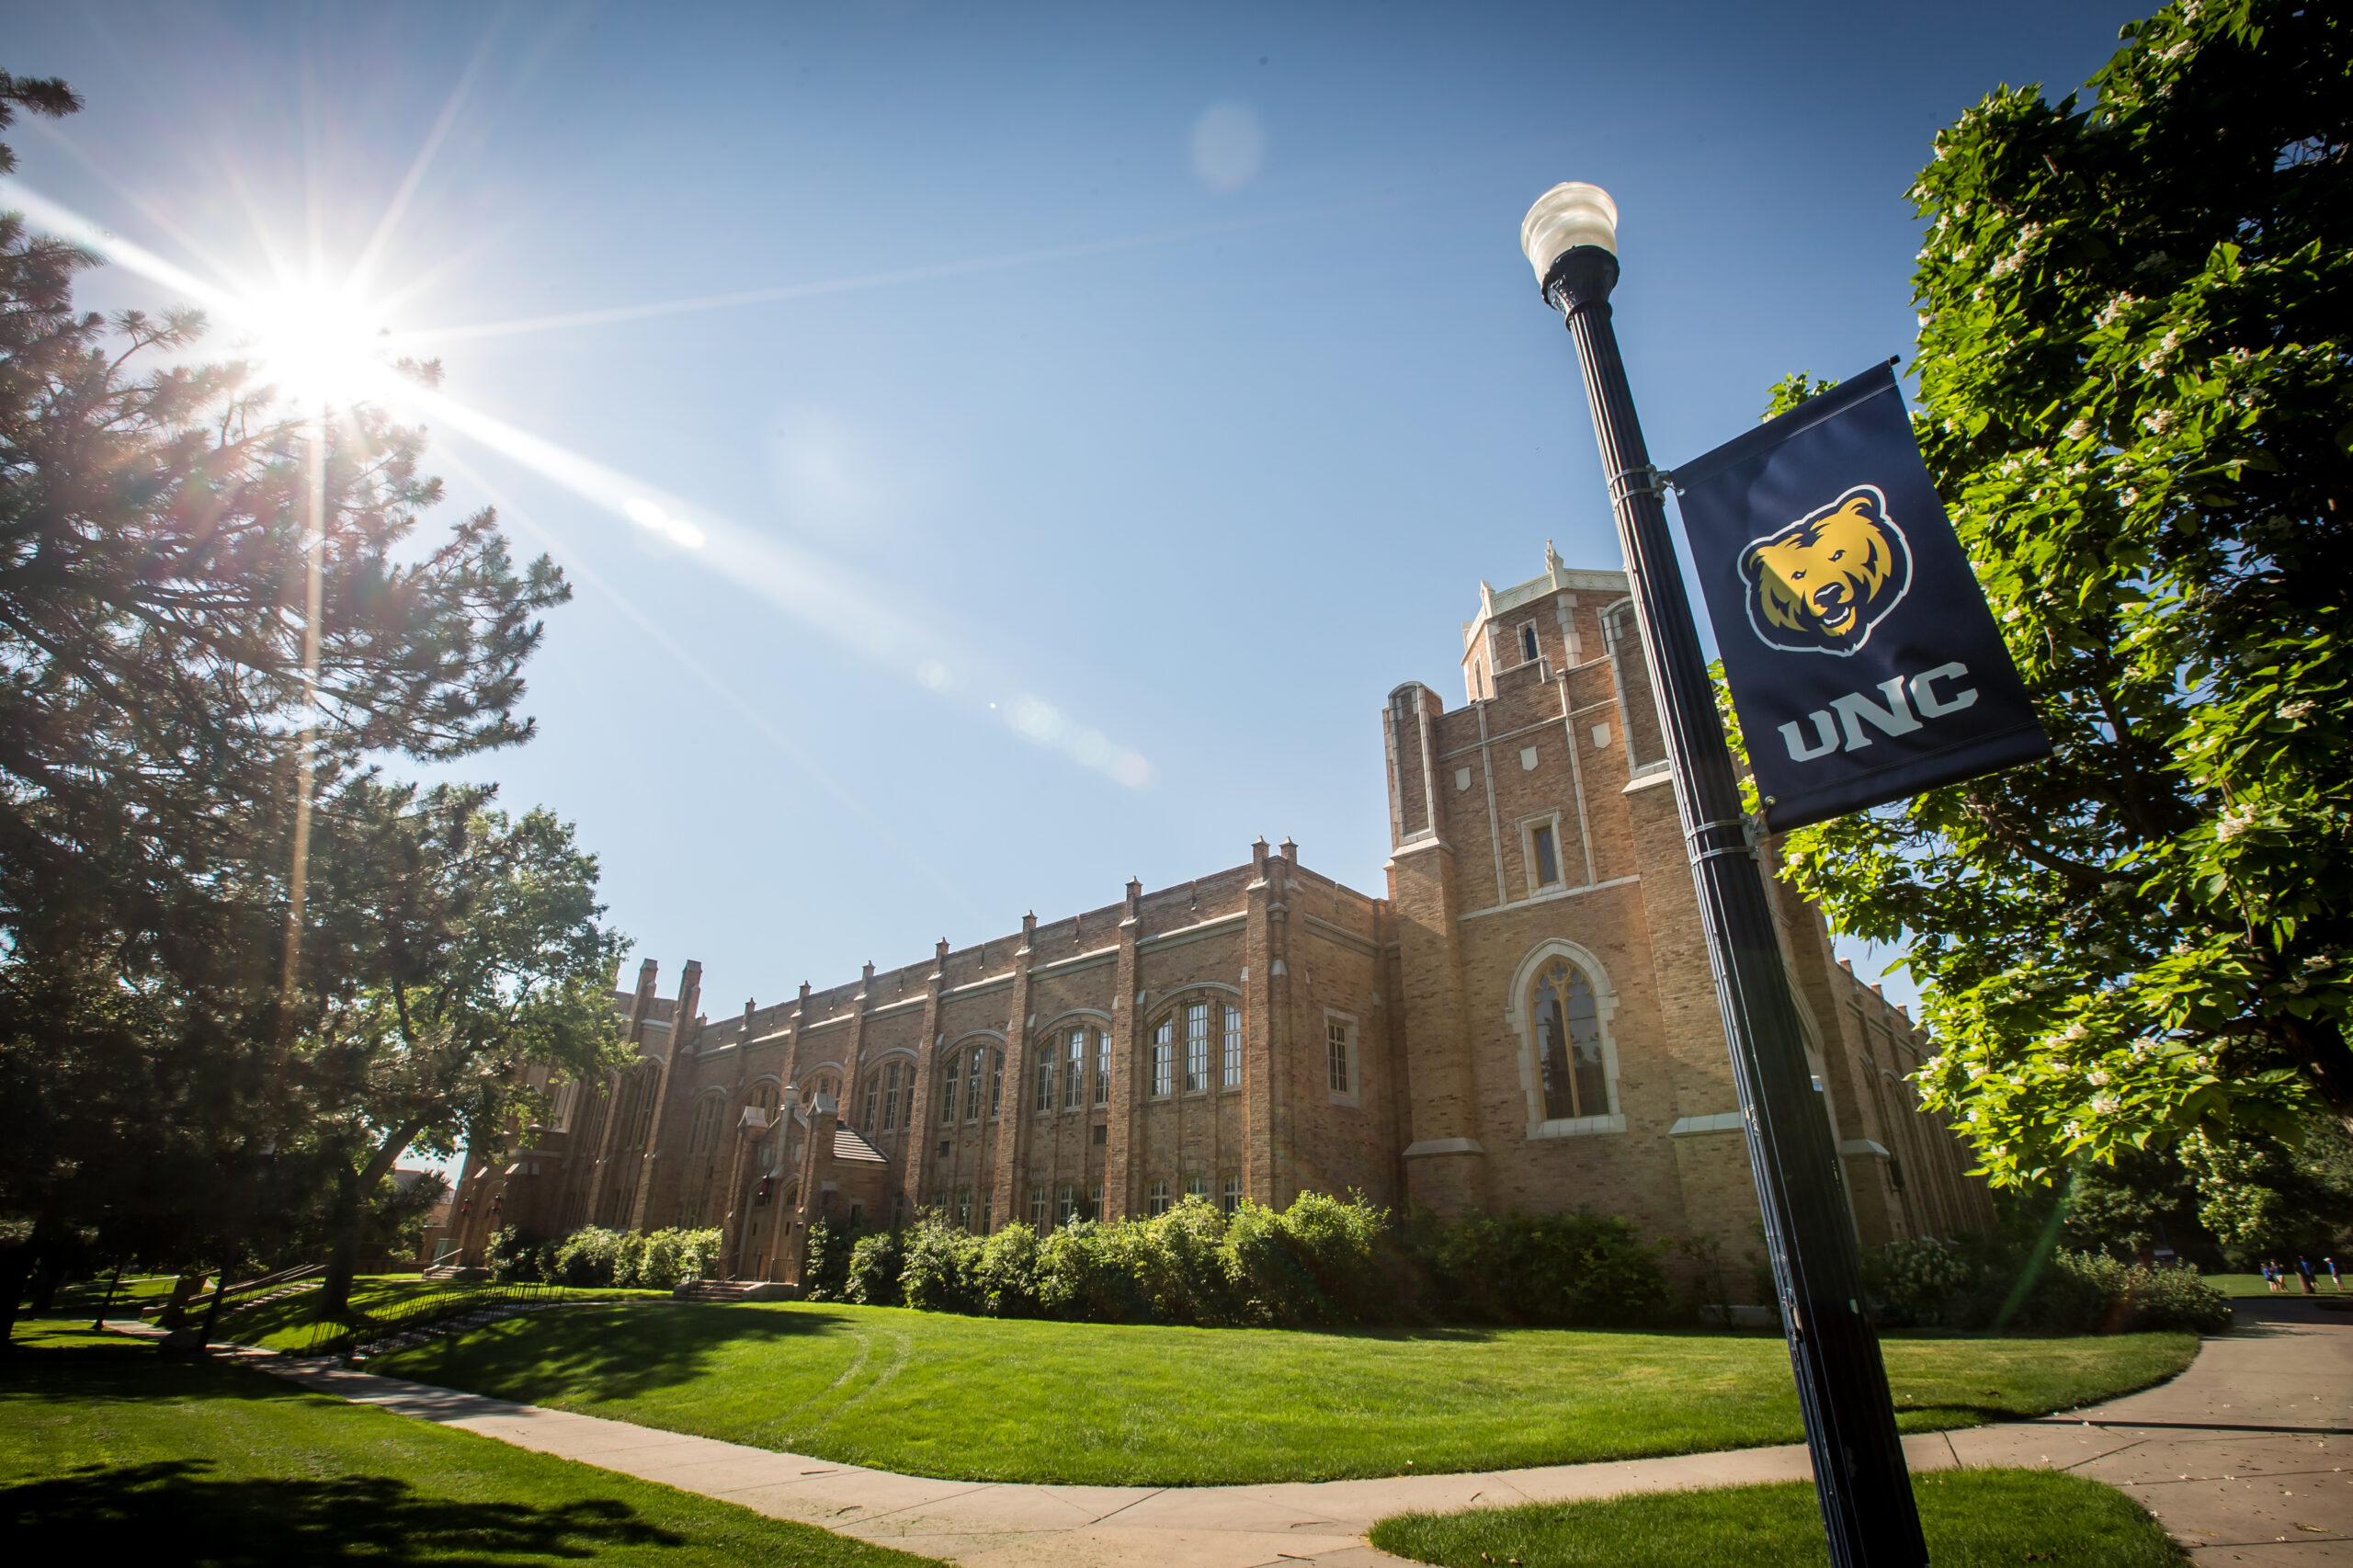 The University of Northern Colorado chose Passport because of the company’s success in the City of Greeley.